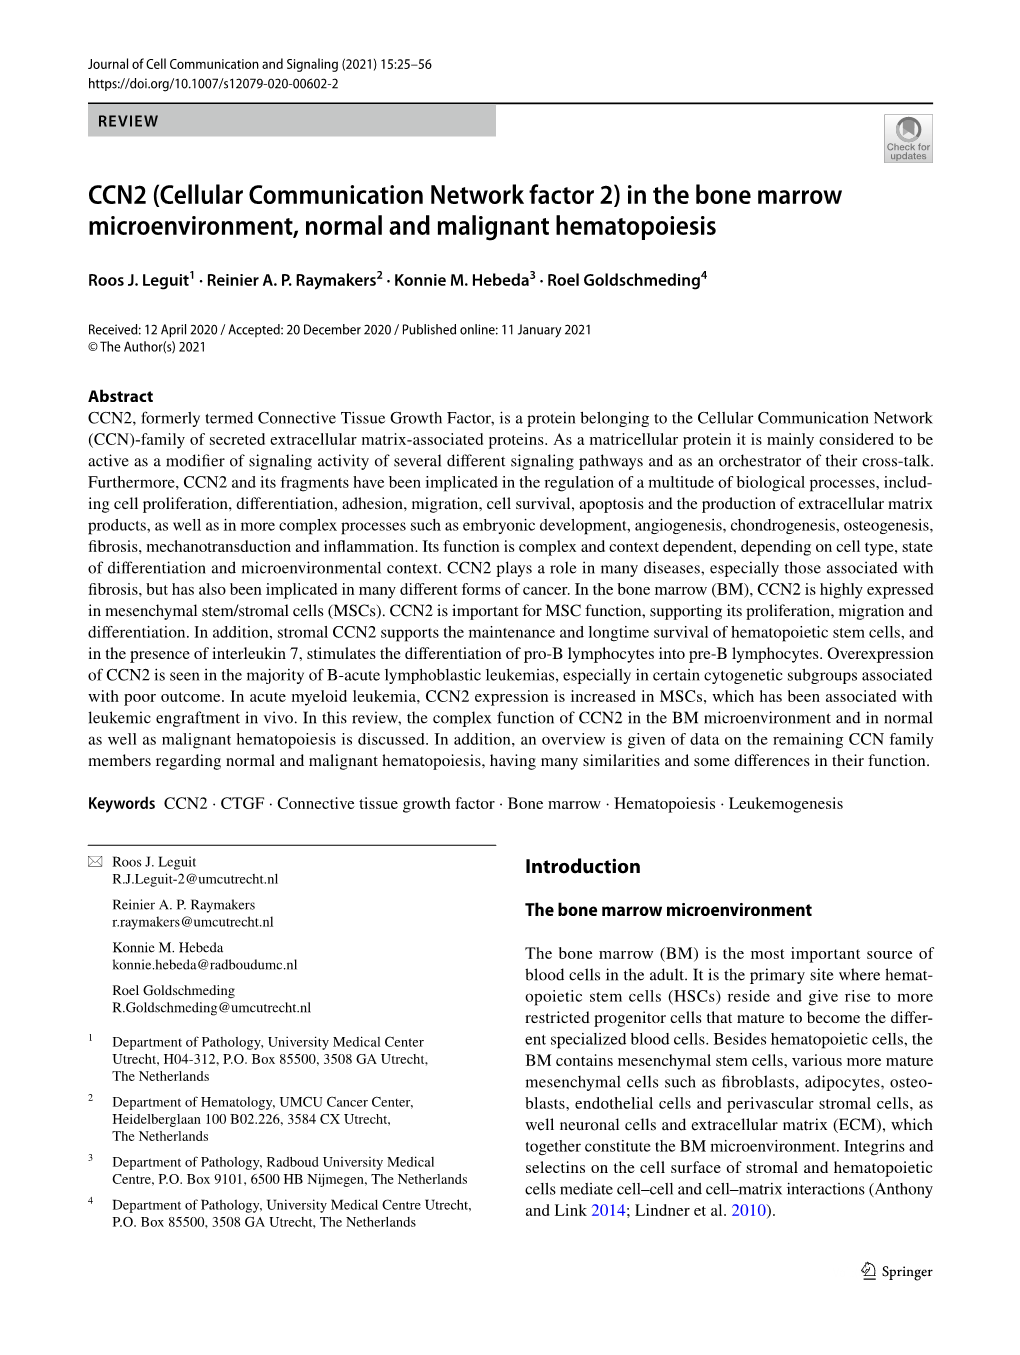 CCN2 (Cellular Communication Network Factor 2) in the Bone Marrow Microenvironment, Normal and Malignant Hematopoiesis